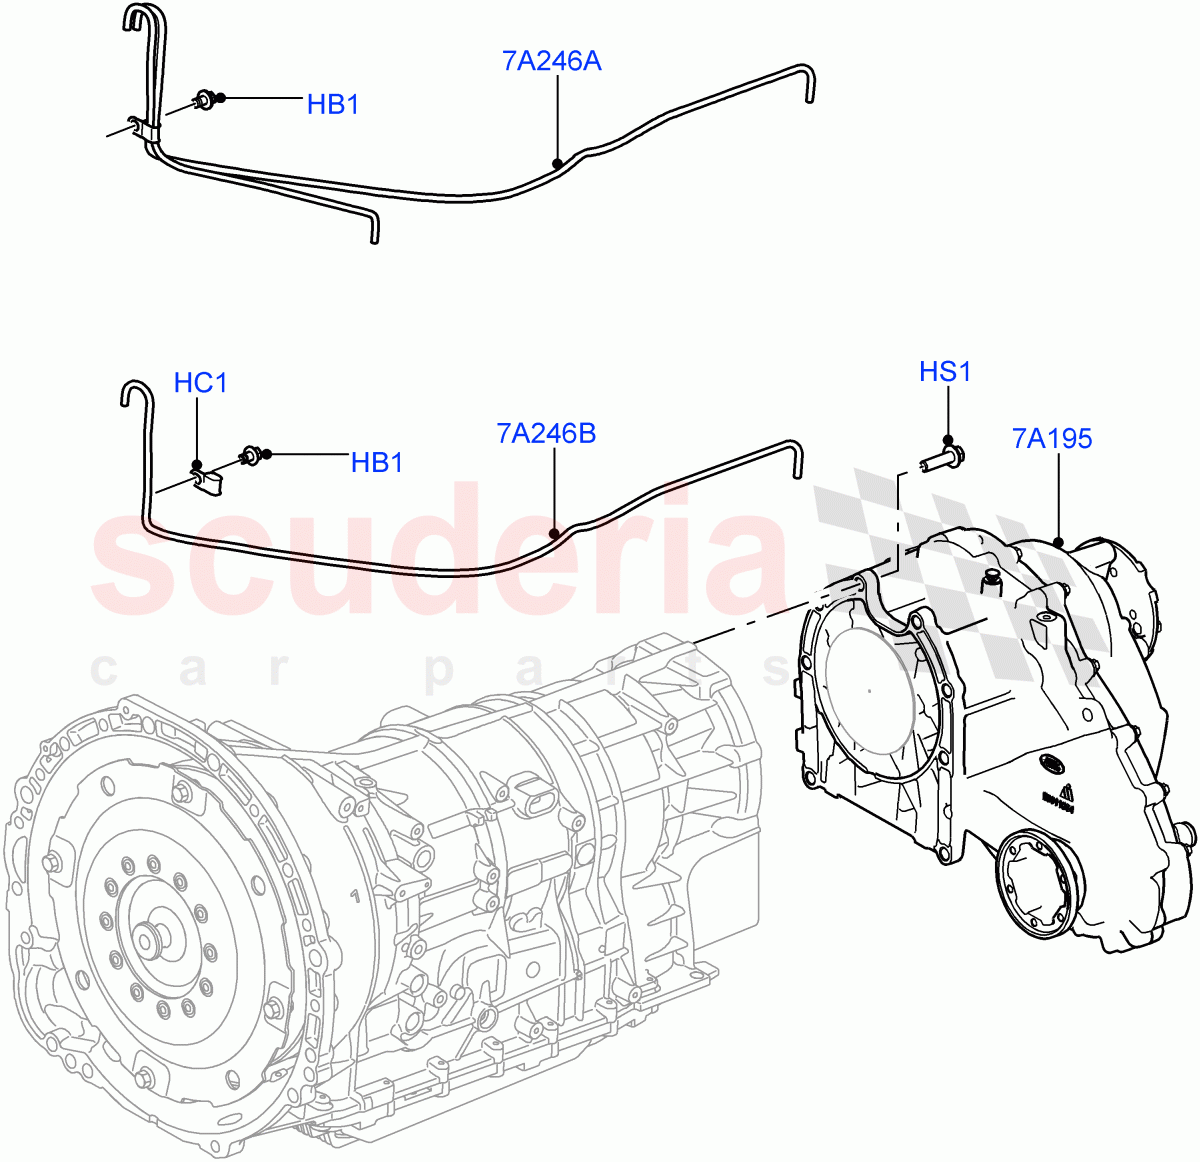 Transfer Drive Case(8 Speed Auto Trans ZF 8HP70 4WD,With 1 Speed Transfer Case,8 Speed Auto Trans ZF 8HP45)((V)FROMEA000001,(V)TOGA999999) of Land Rover Land Rover Discovery 4 (2010-2016) [2.7 Diesel V6]